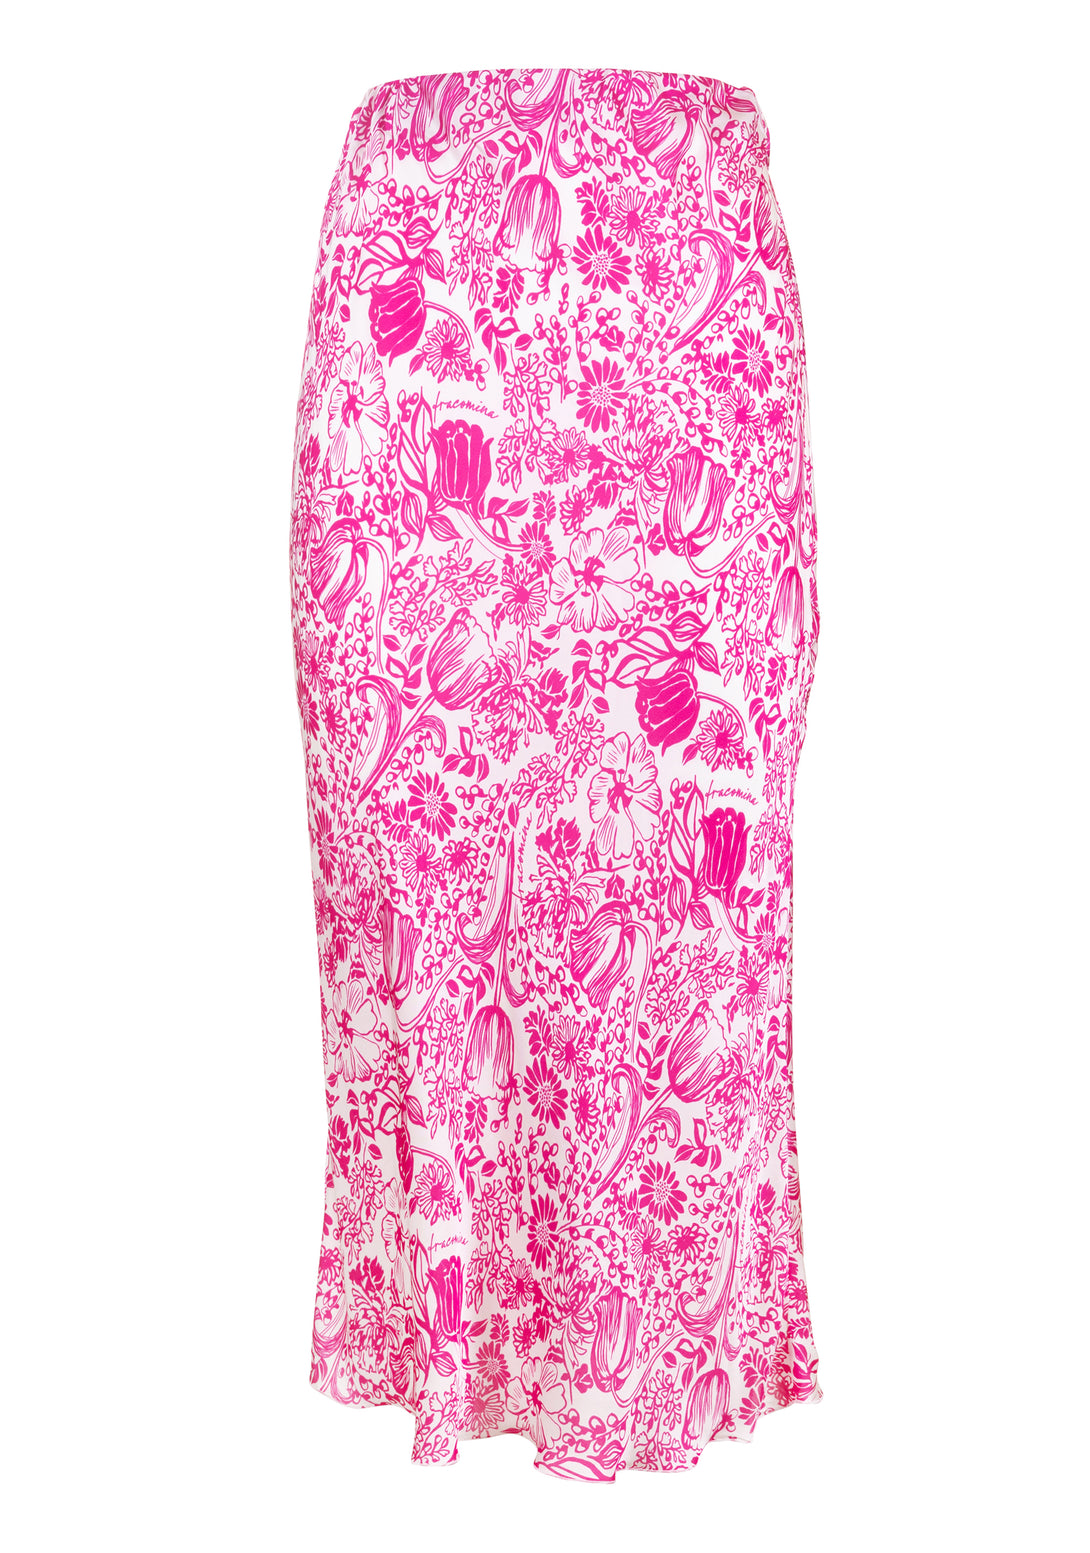 Sheath skirt slim fit, middle length, with flowery pattern